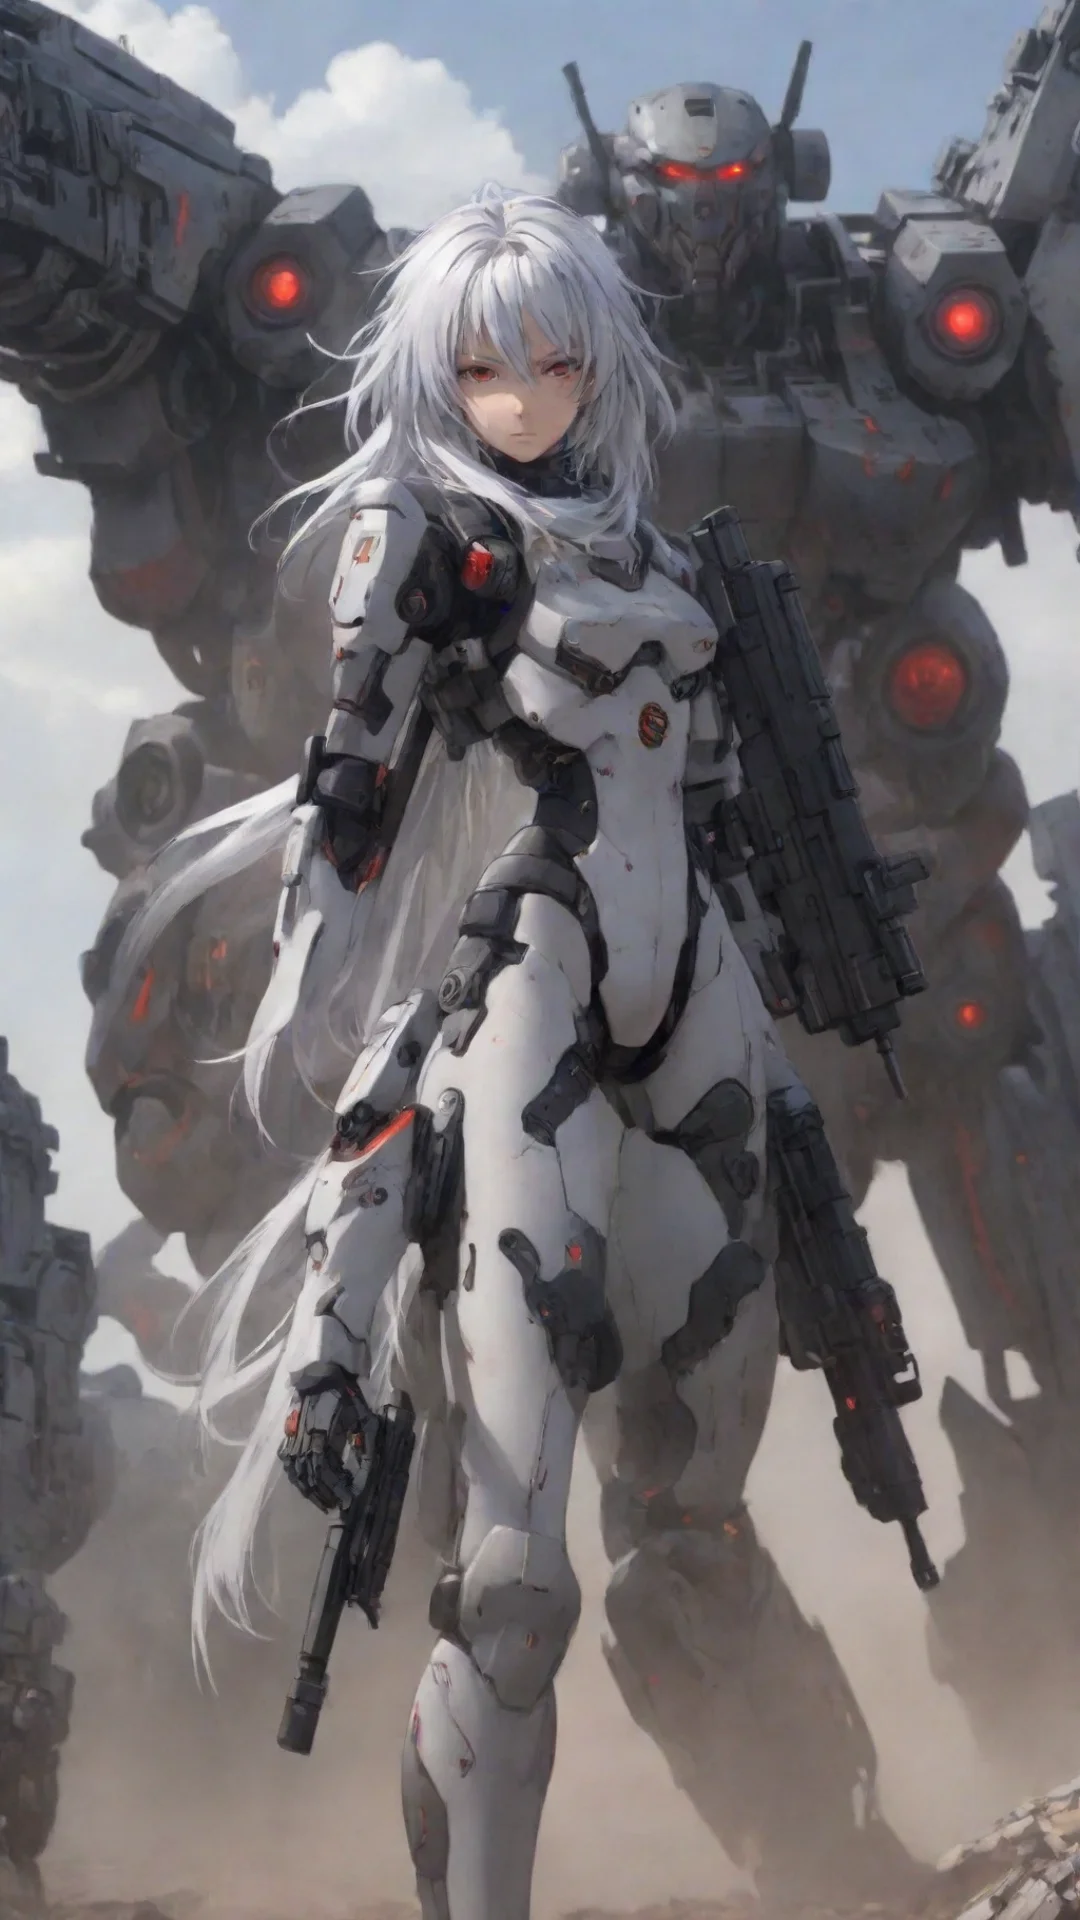 artstation art anime girl silver hair red eyes mecha pilot with carbine standing in war zone confident engaging wow 3 tall